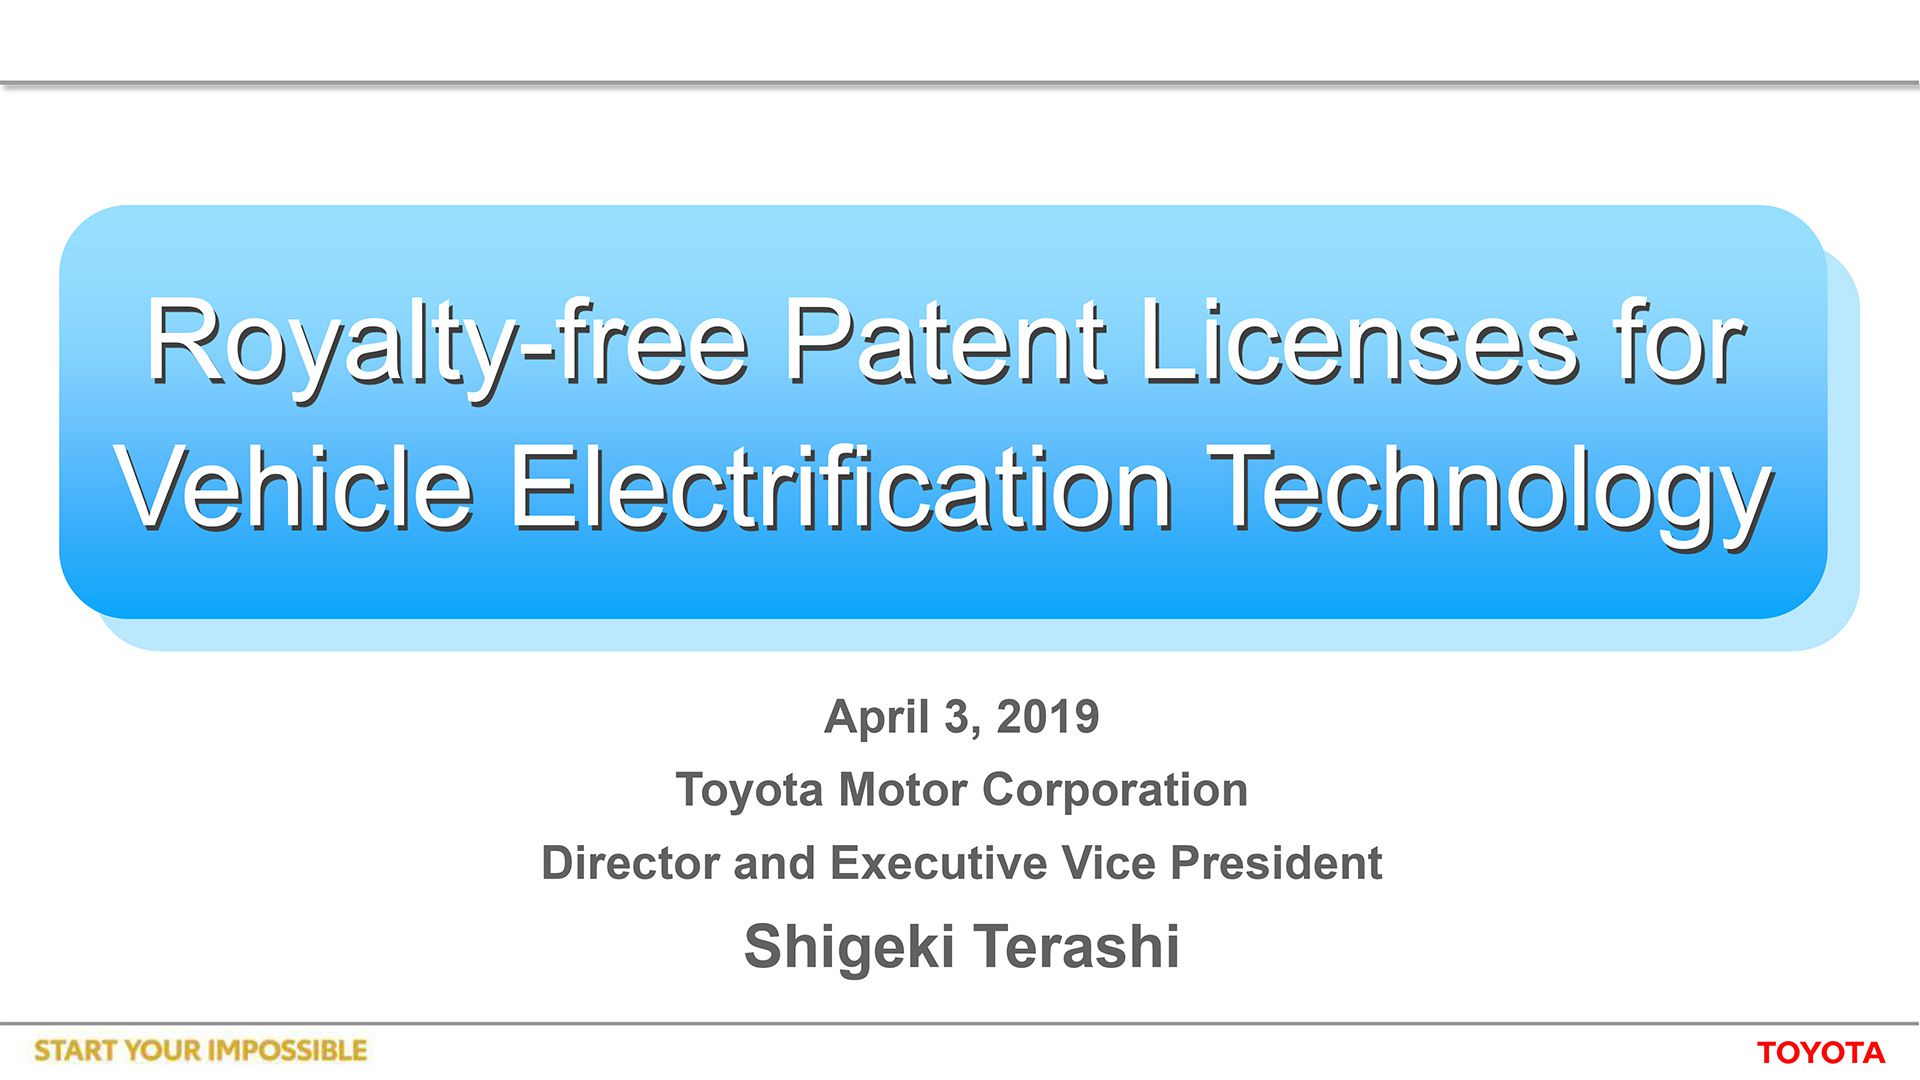 Royalty-free Patent Licenses for Vehicle Electrification Technology